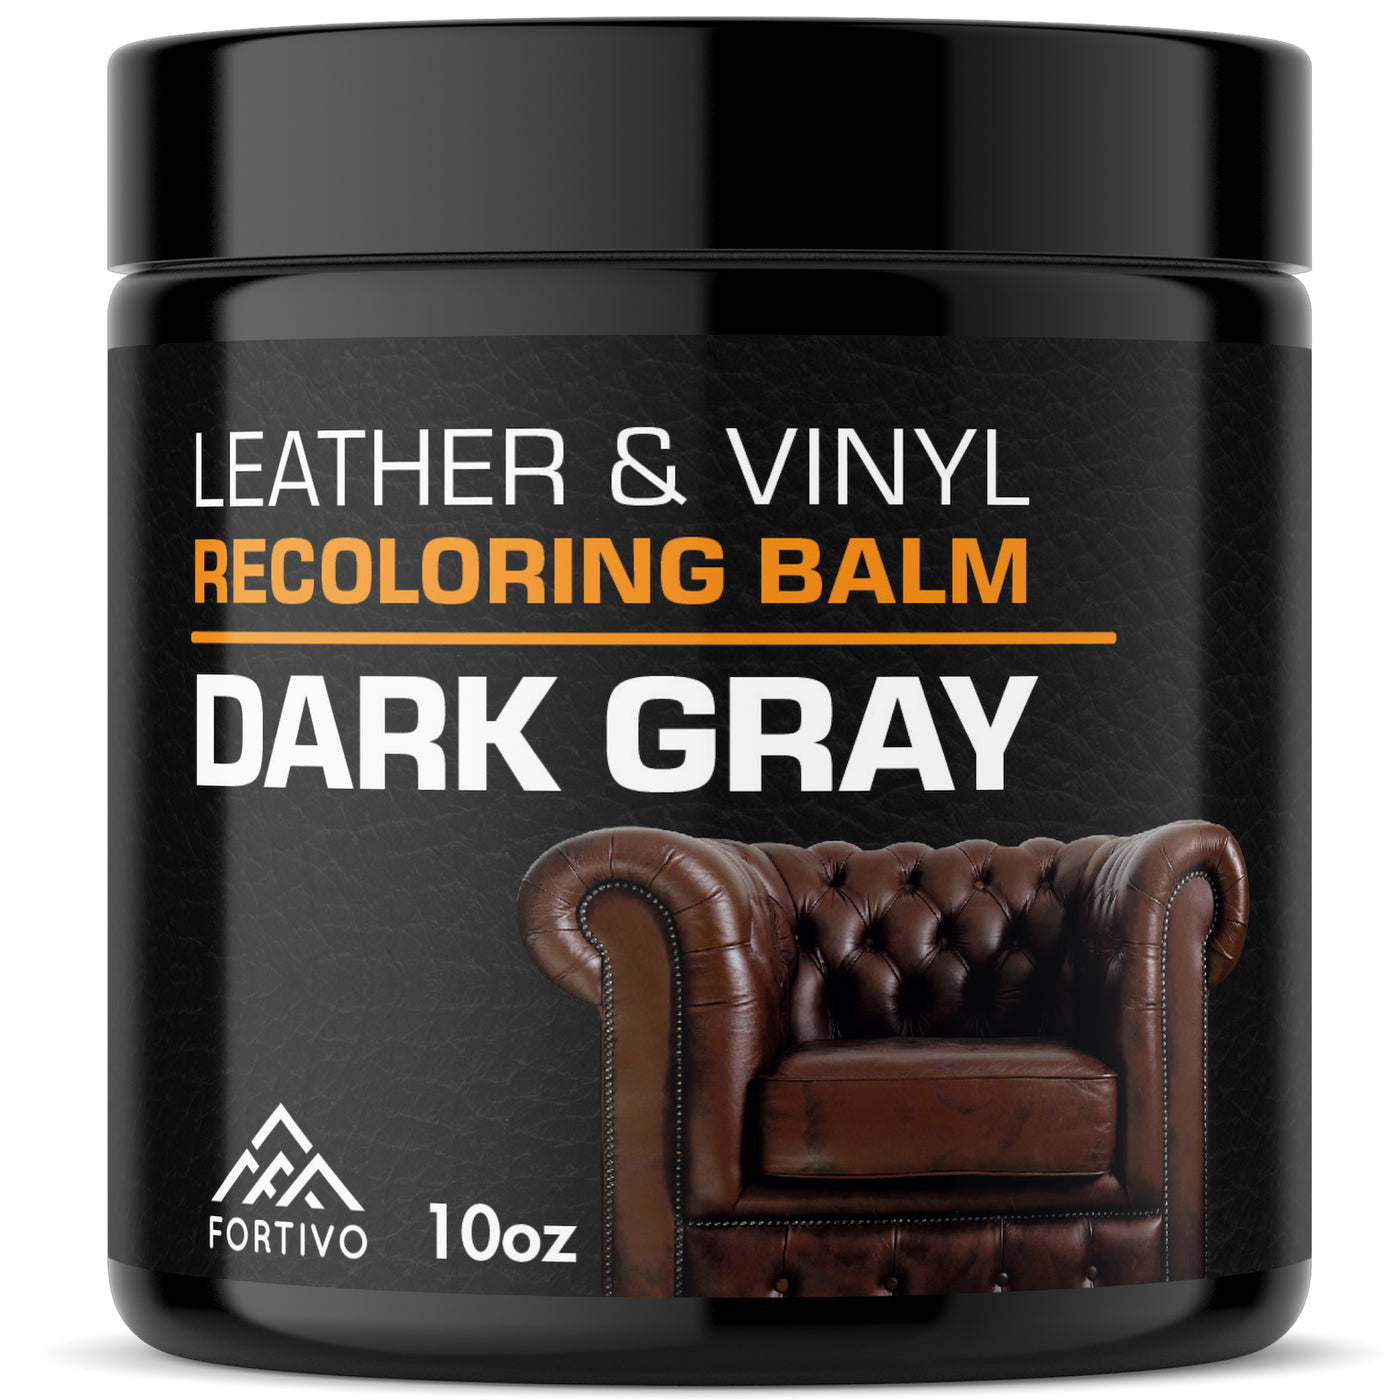  Leather Recoloring Balm with Mink, Dark Gray Leather Paint,  Leather Couch Repair Kit, Leather Repair Kit for Furniture, Leather  Restorer for Couches, Leather Dye for Furniture, Mink Oil for Leather 